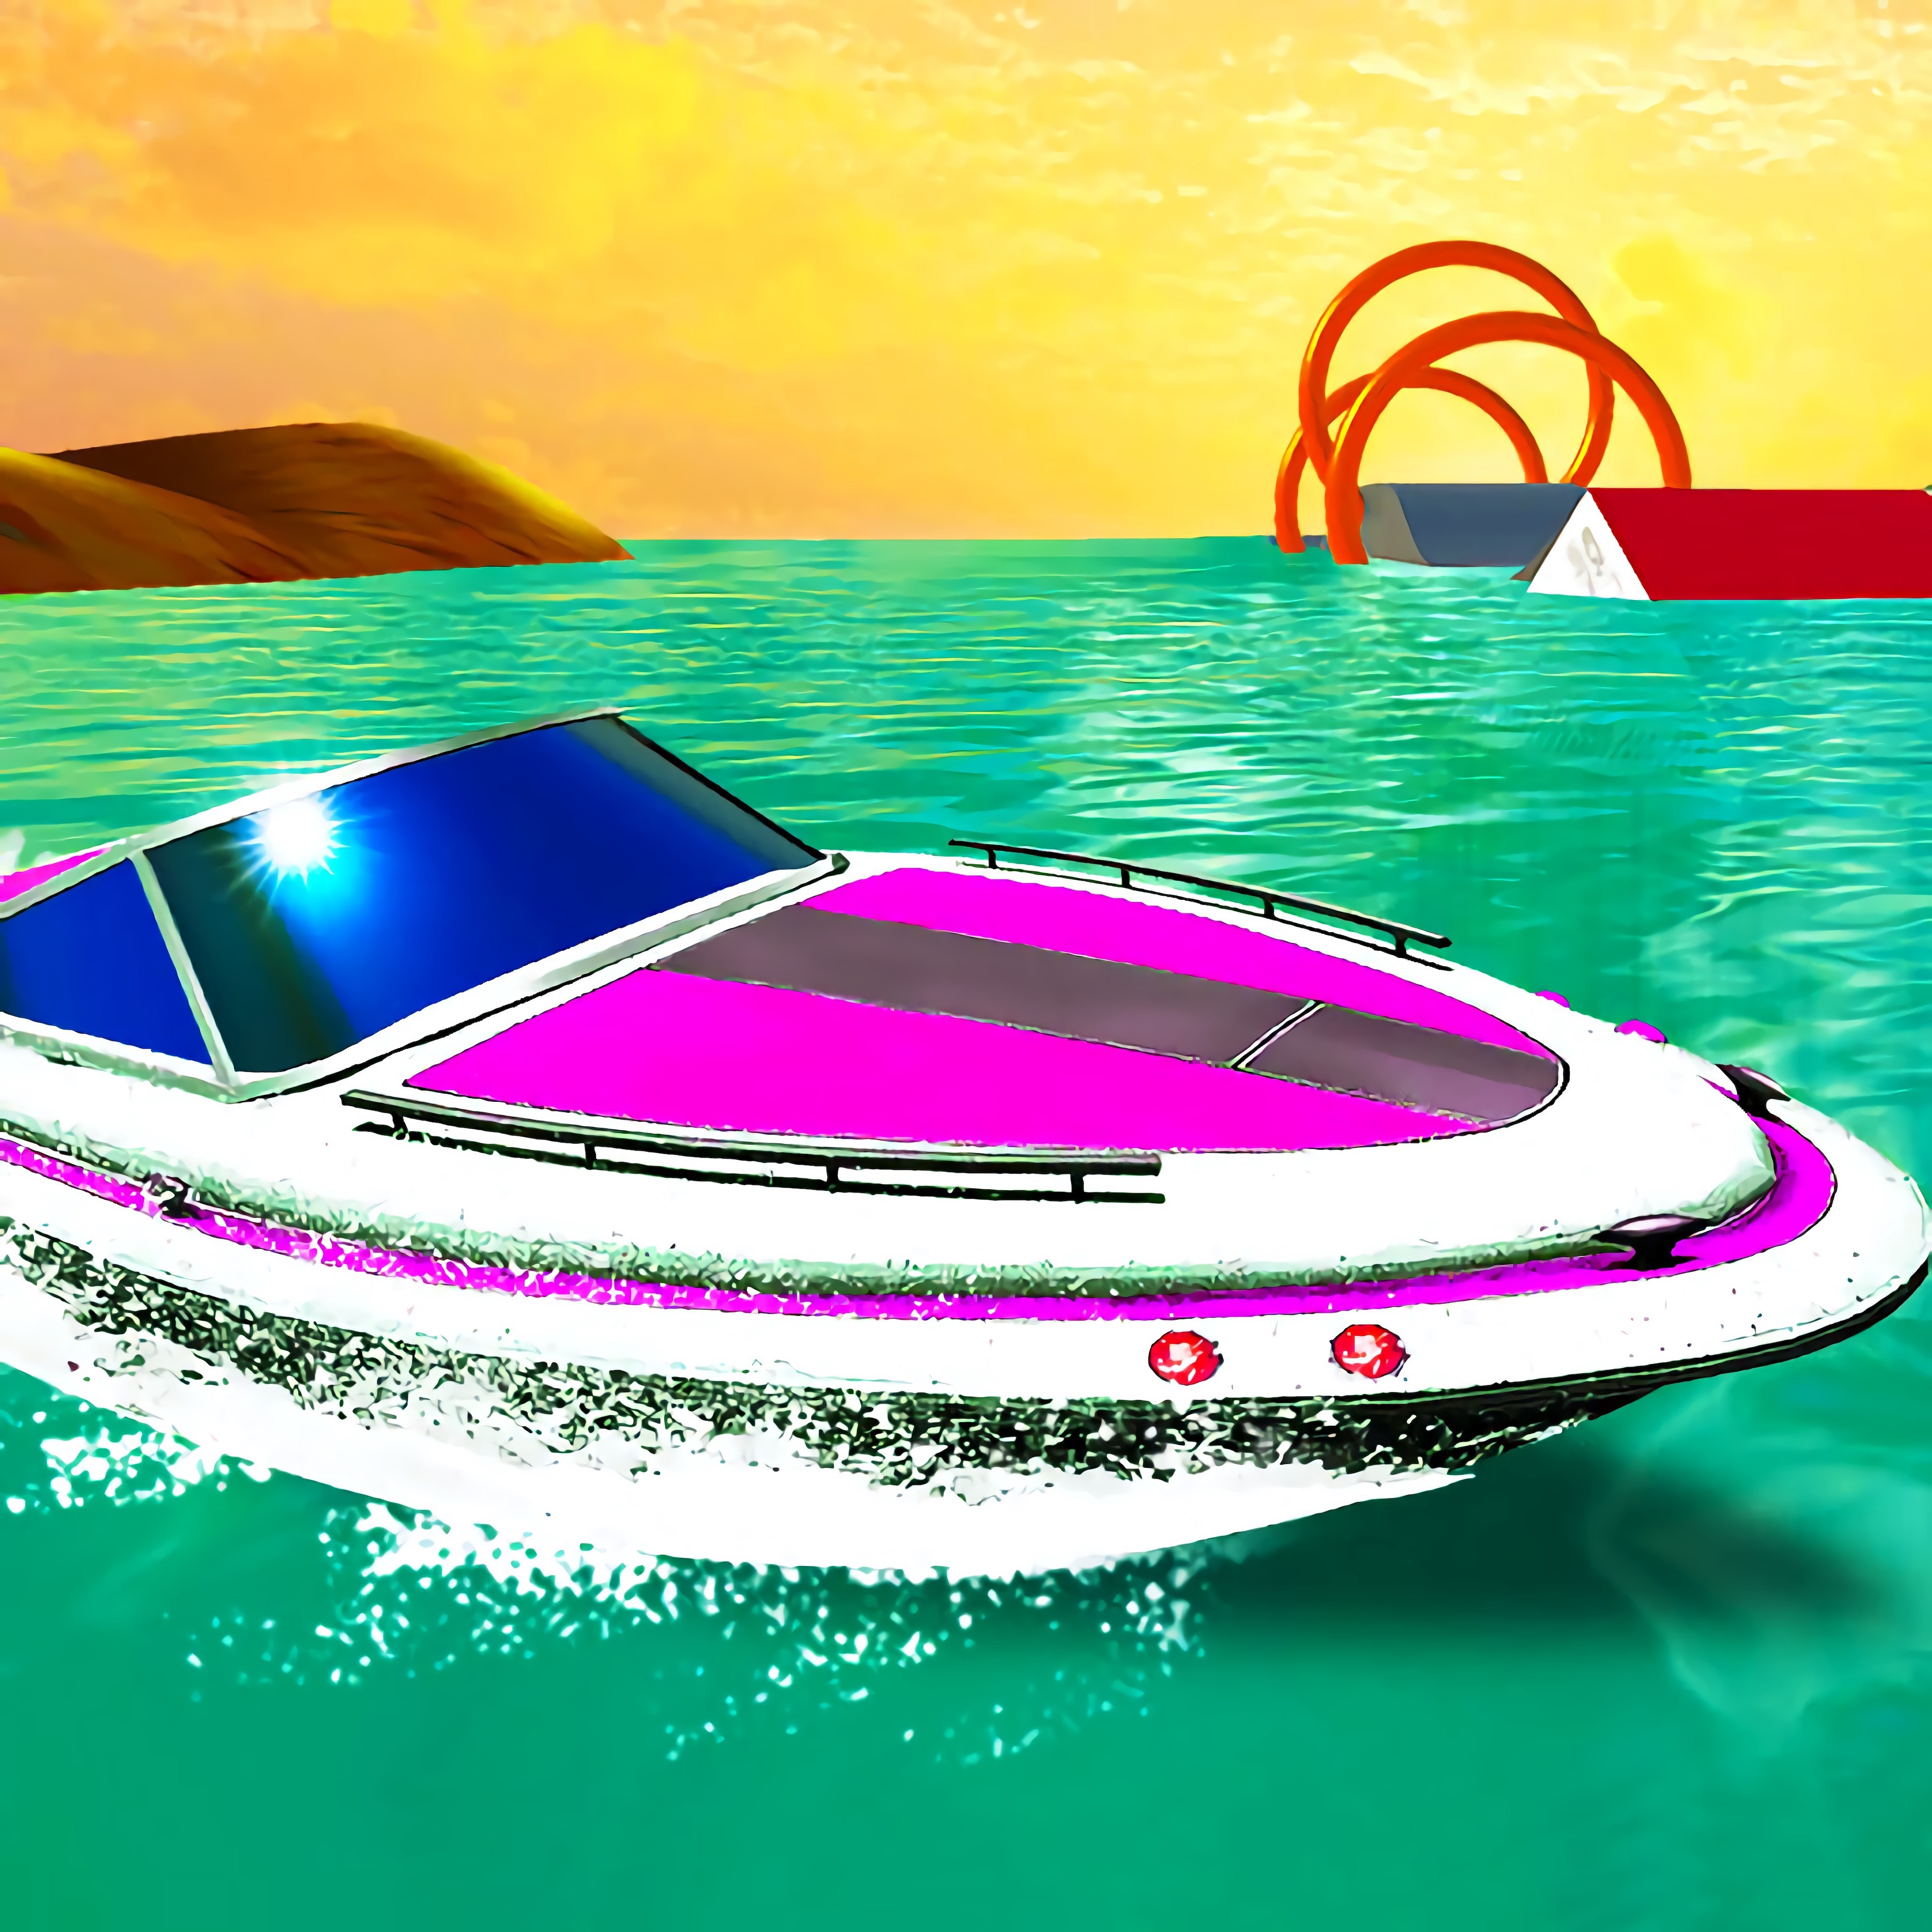 Boat Games Play Free Online Boat Games on Friv 2